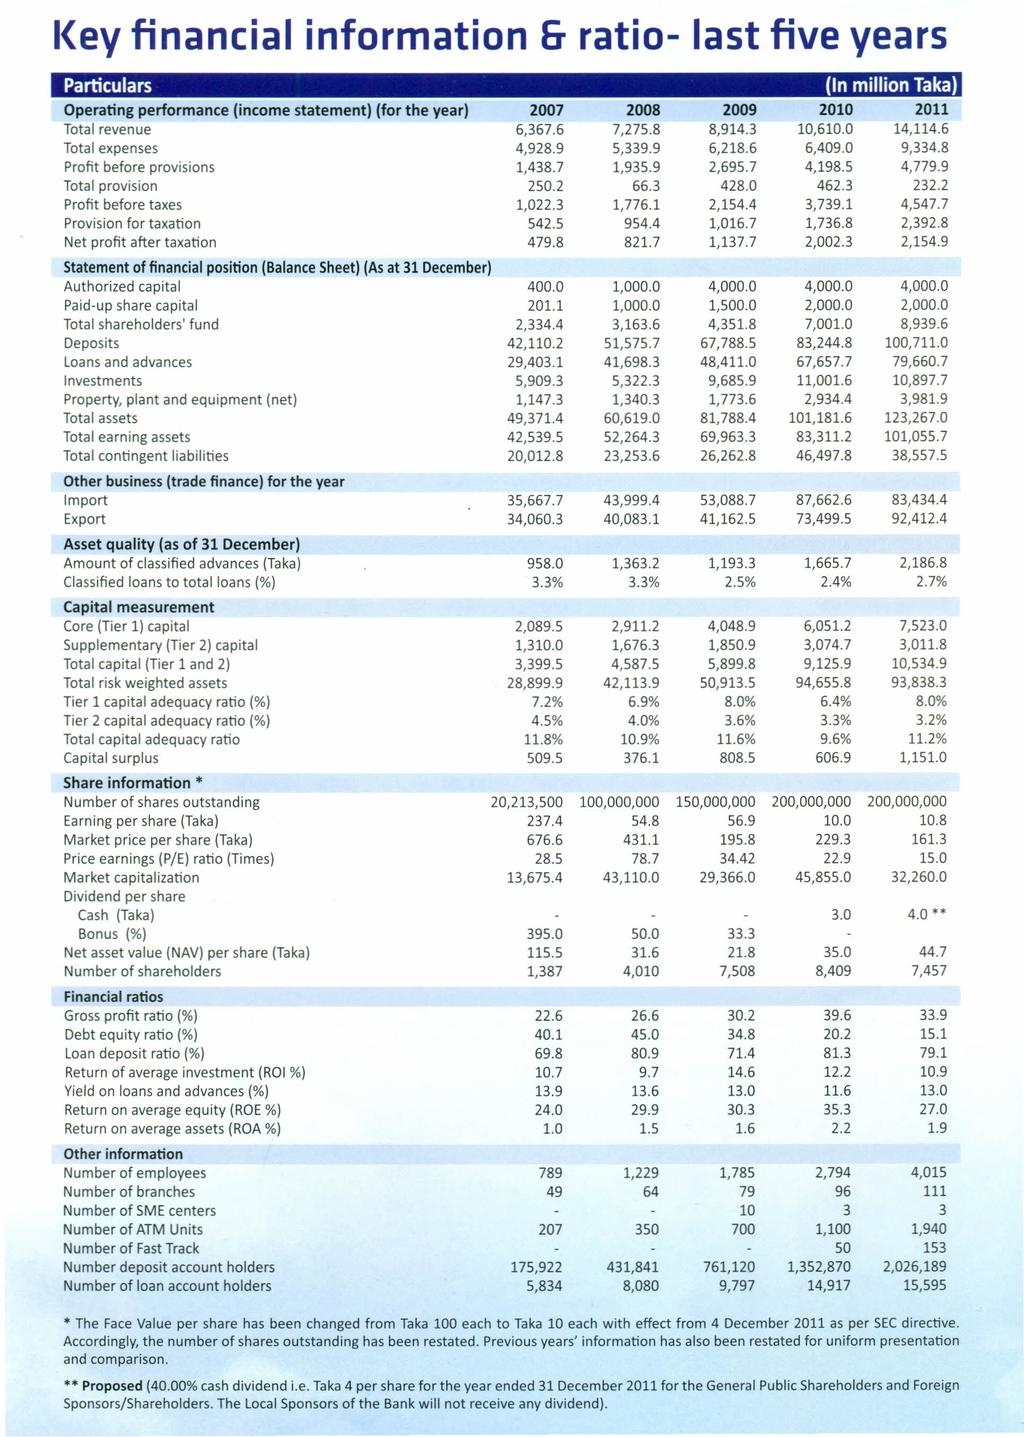 I<ey financial information & ratio- last five years Particulars (In million Taka) Operating performance (income statement) (for the year) 2007 2008 2009 2010 2011 Total revenue 6,367.6 7,275.8 8,914.